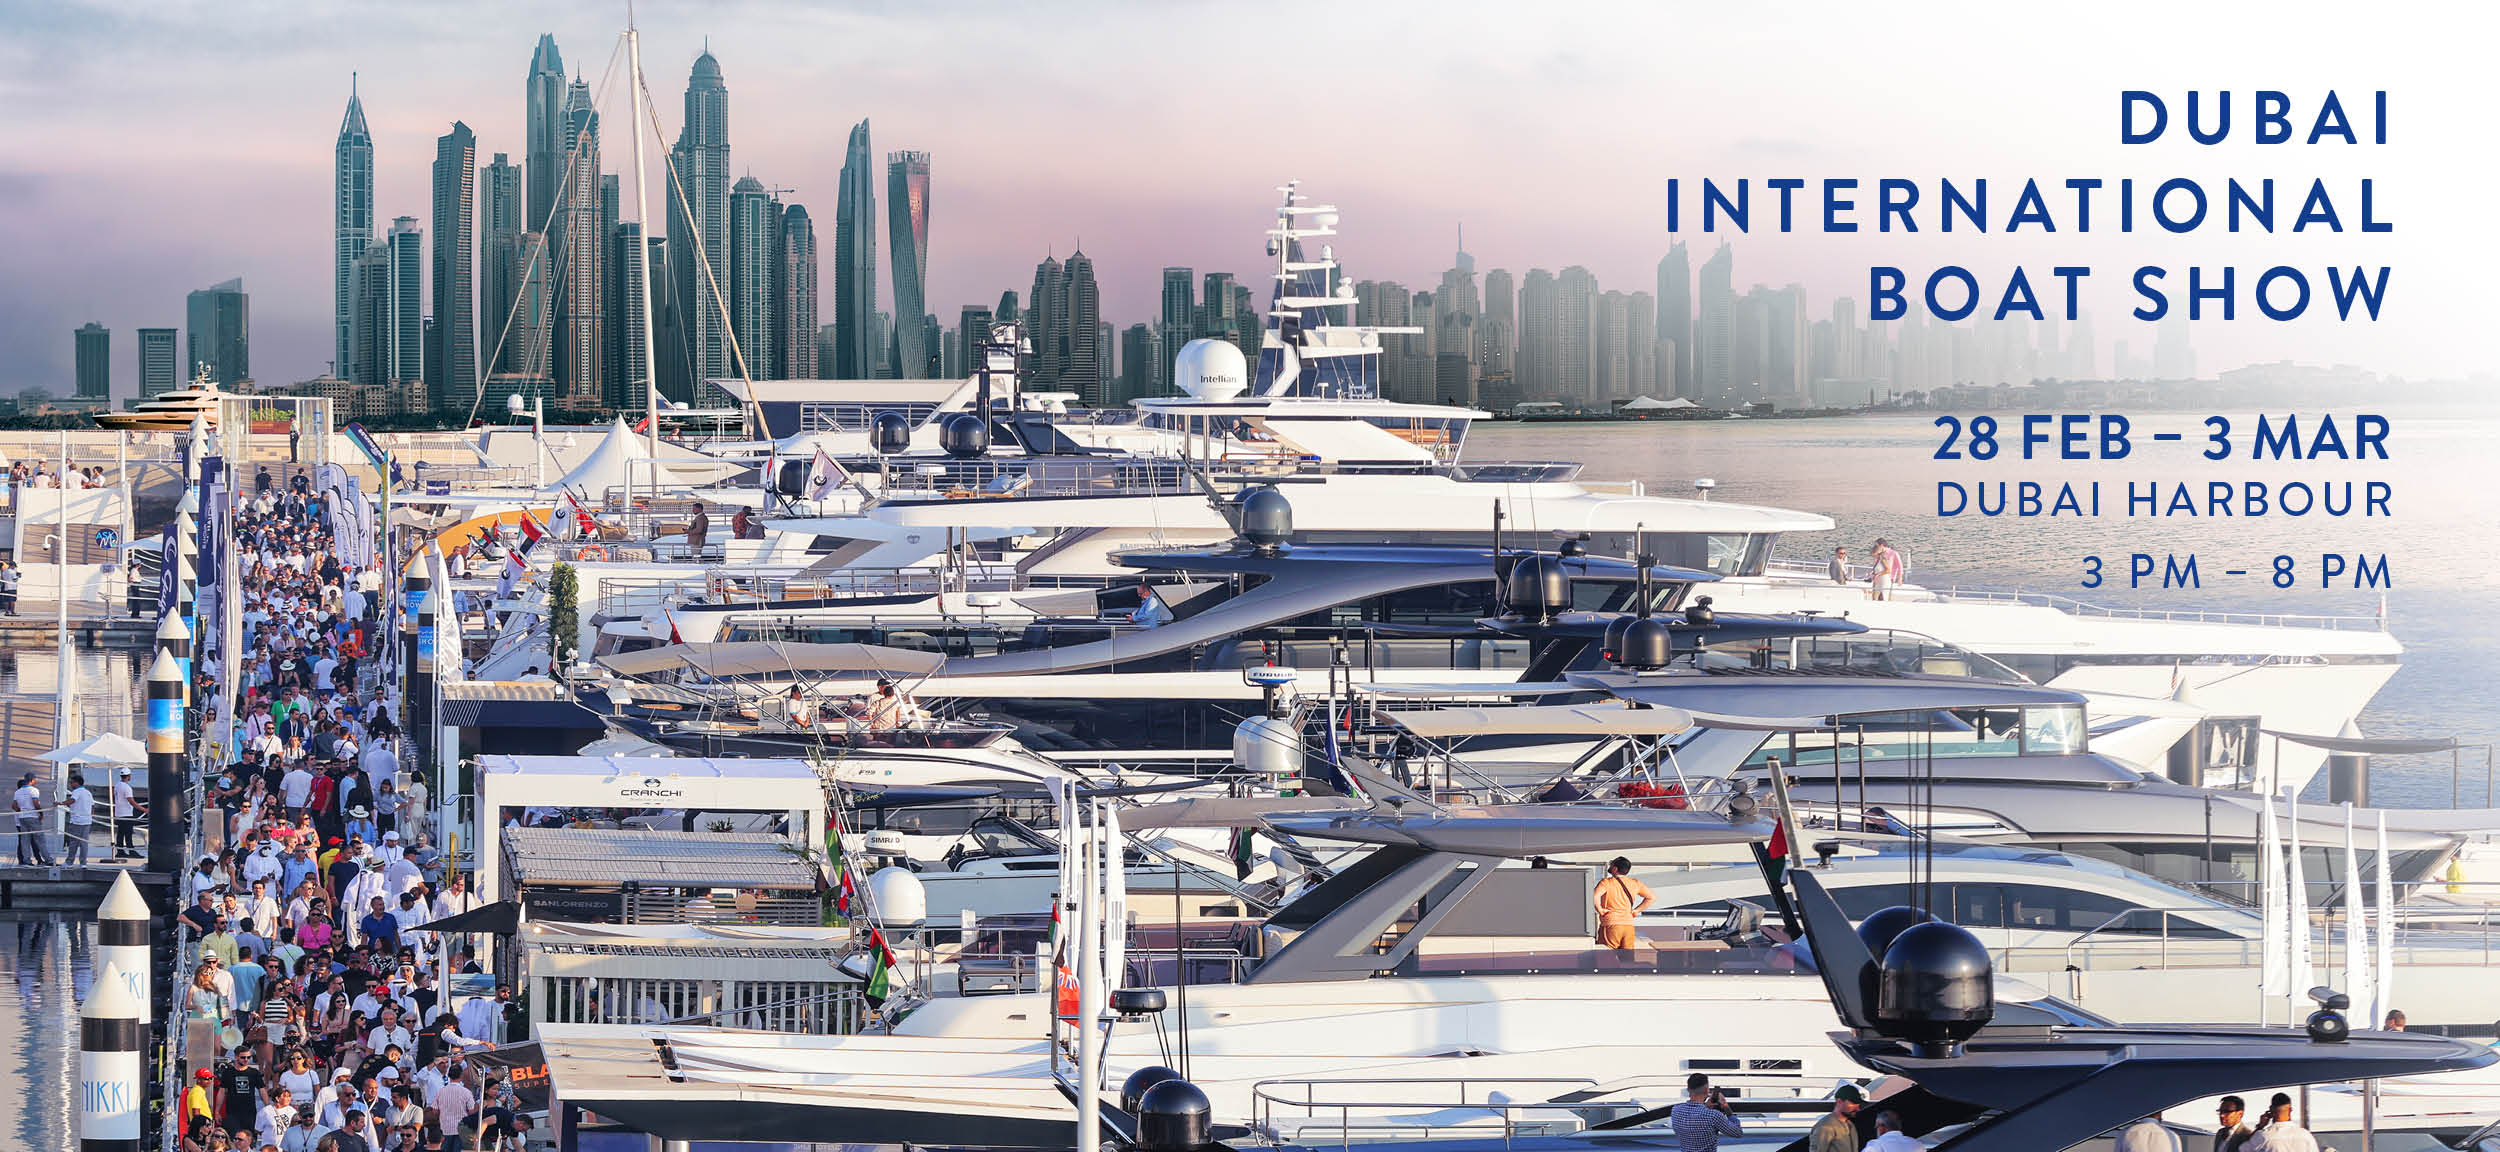 Where the world's finest superyachts are found - Dubai International Boat Show